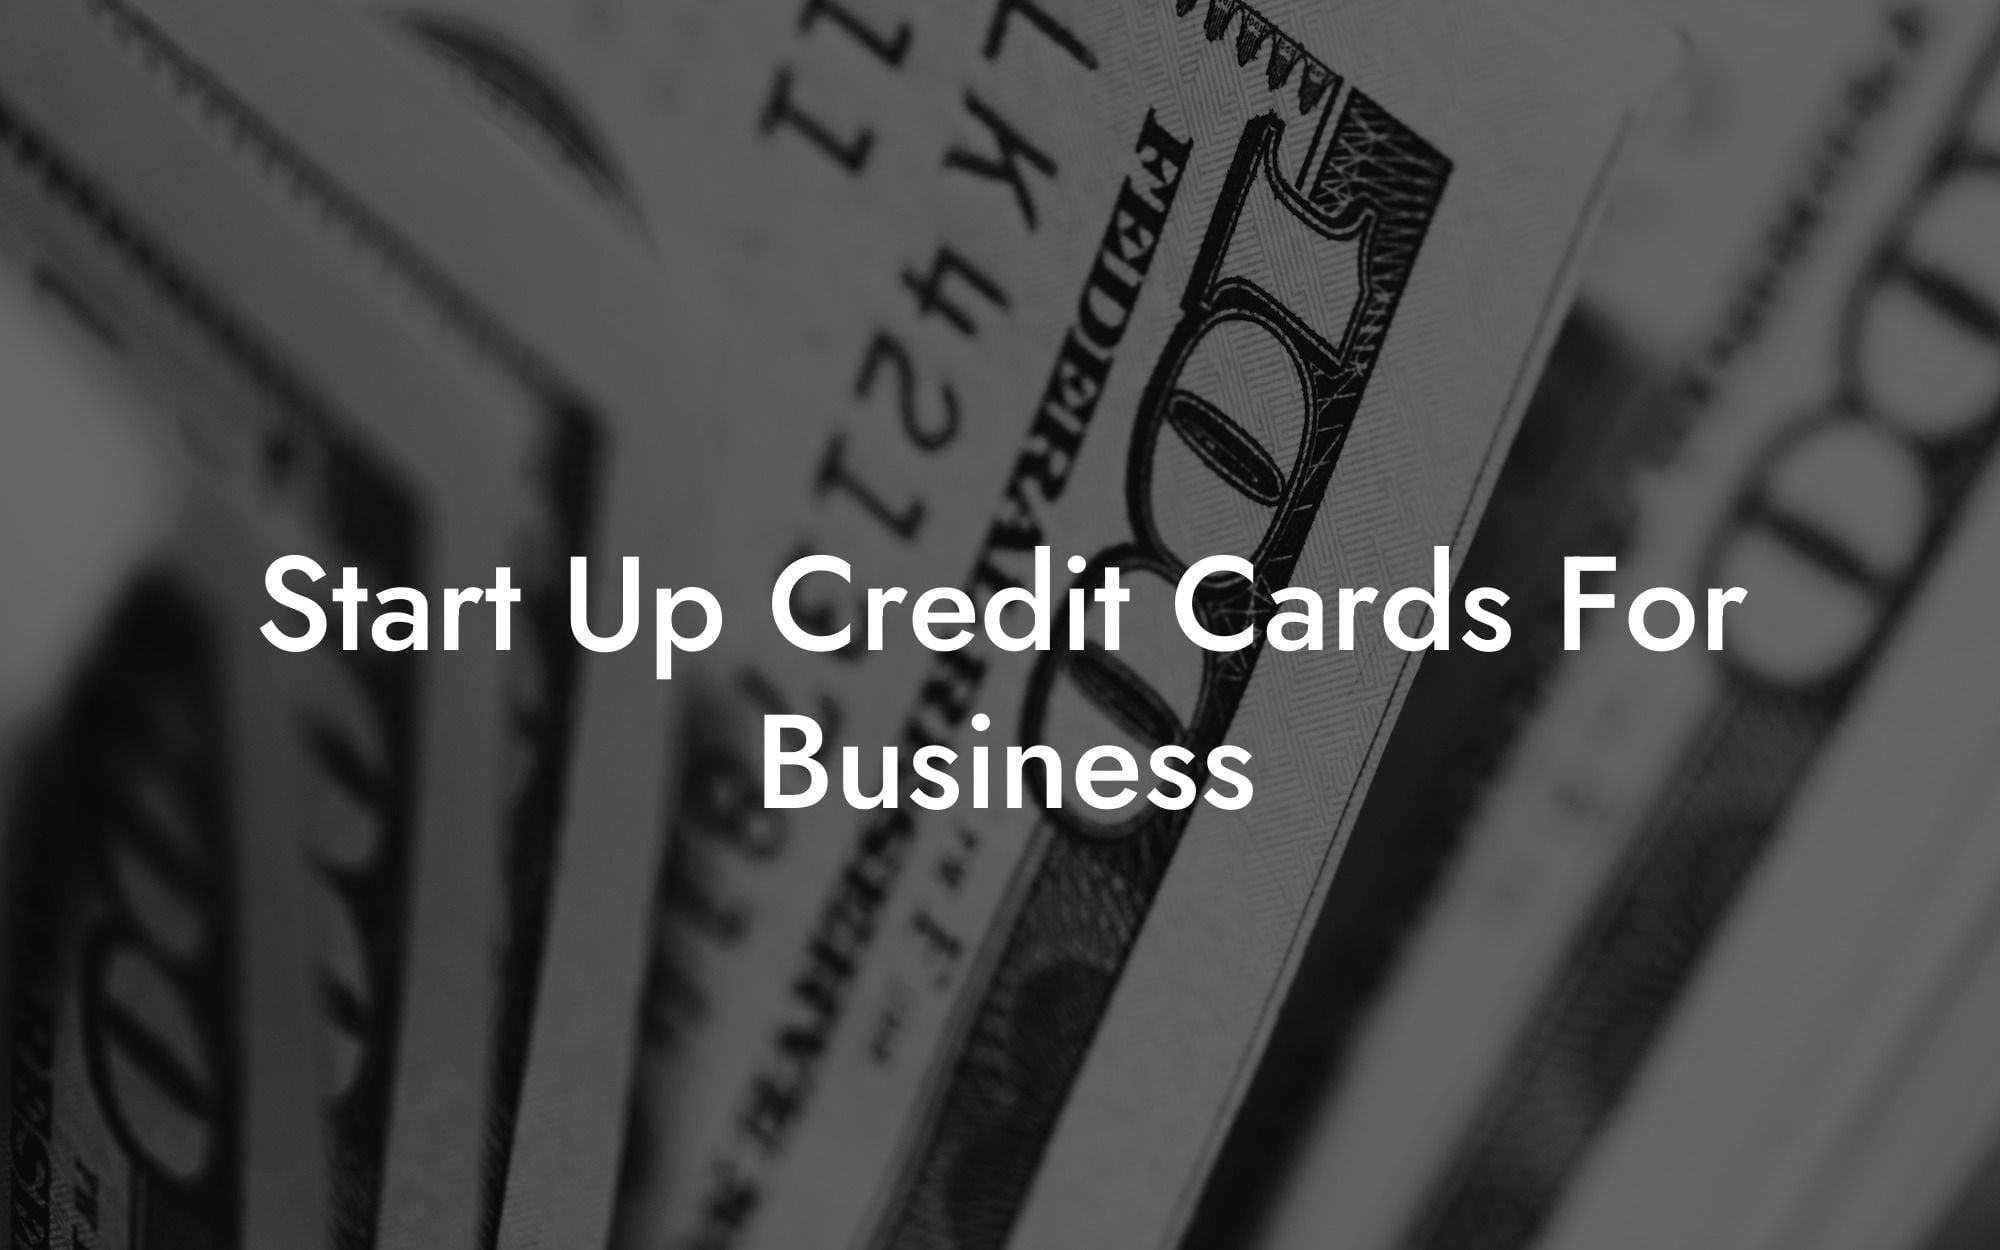 Start Up Credit Cards For Business